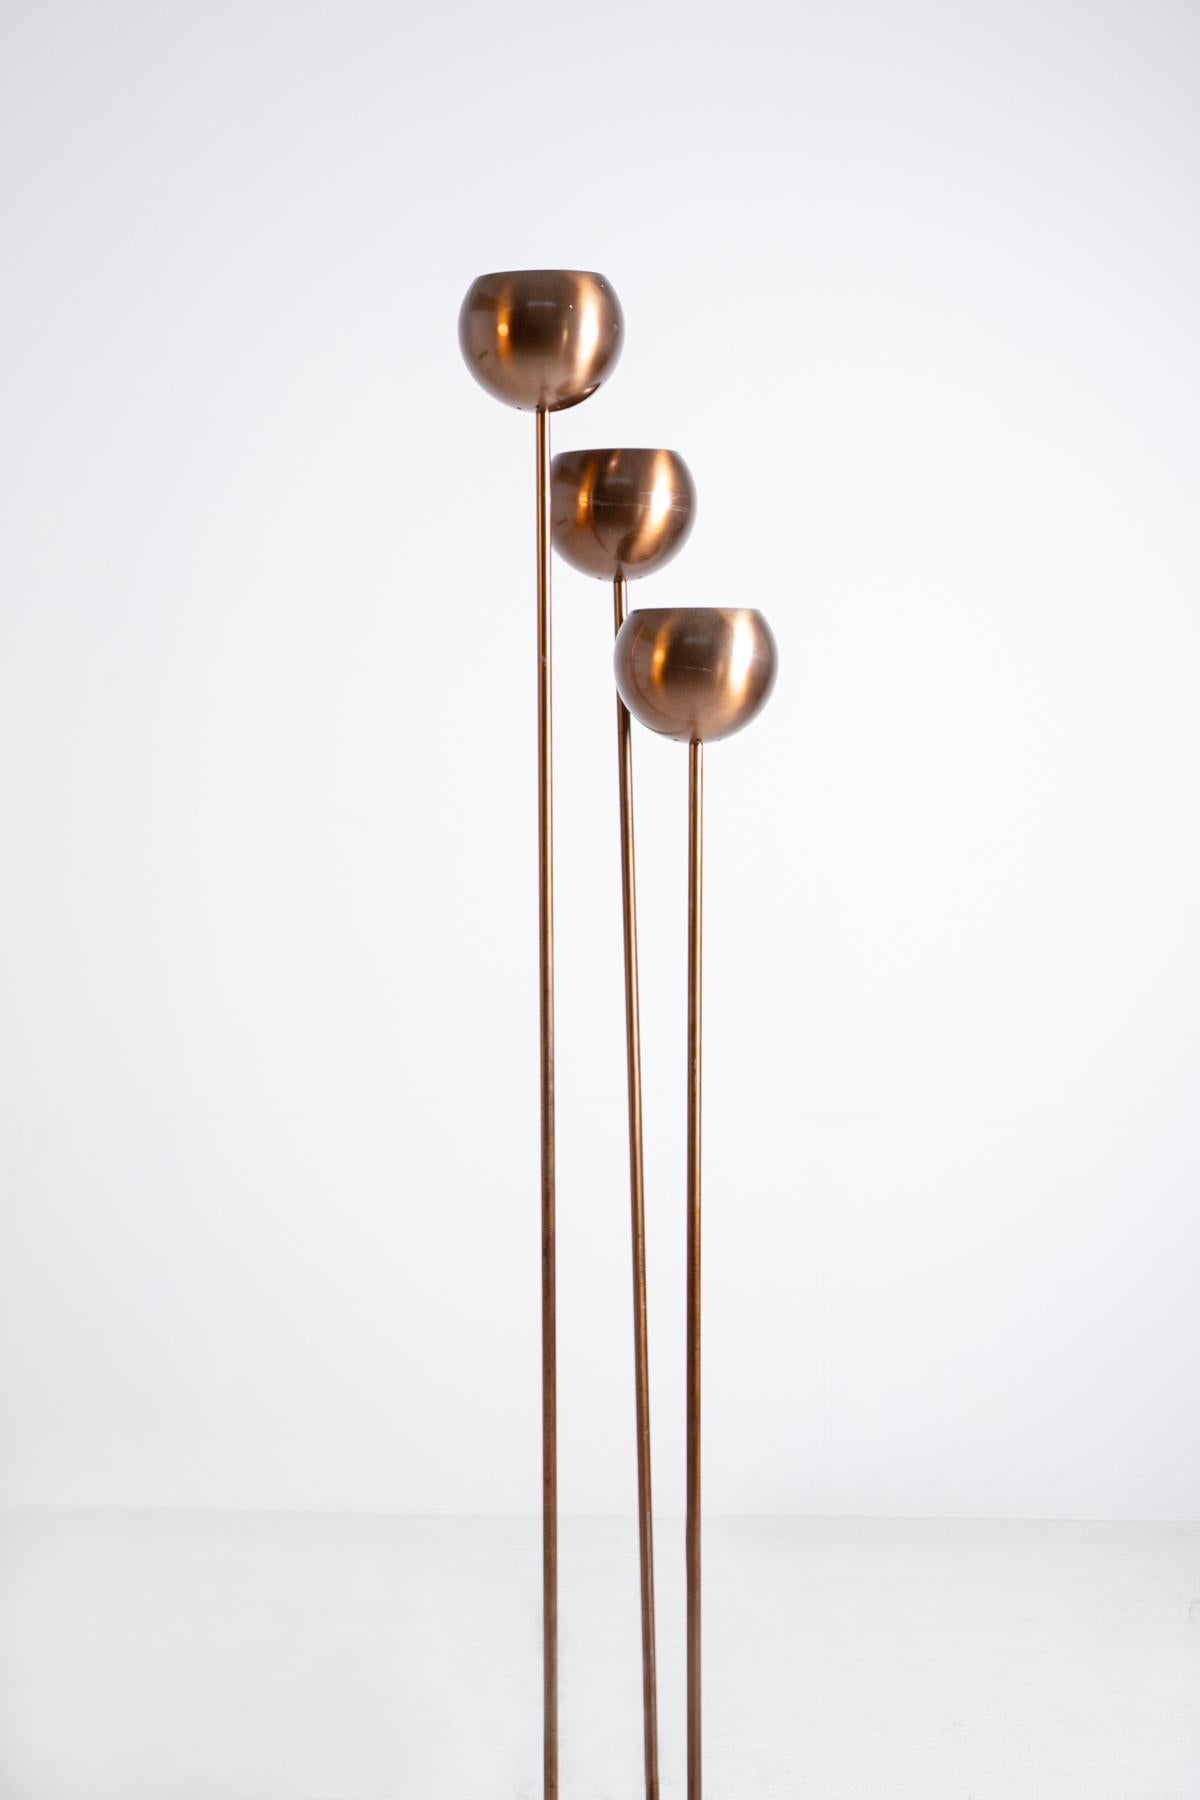 Modernist floor lamp designed by Goffredo Reggiani in the 1960s. The lamp is made entirely of copper. The lamp is made with a tubular structure. The lamp caps are spherical in shape to accommodate the light holder. 
The lamp is suitable for